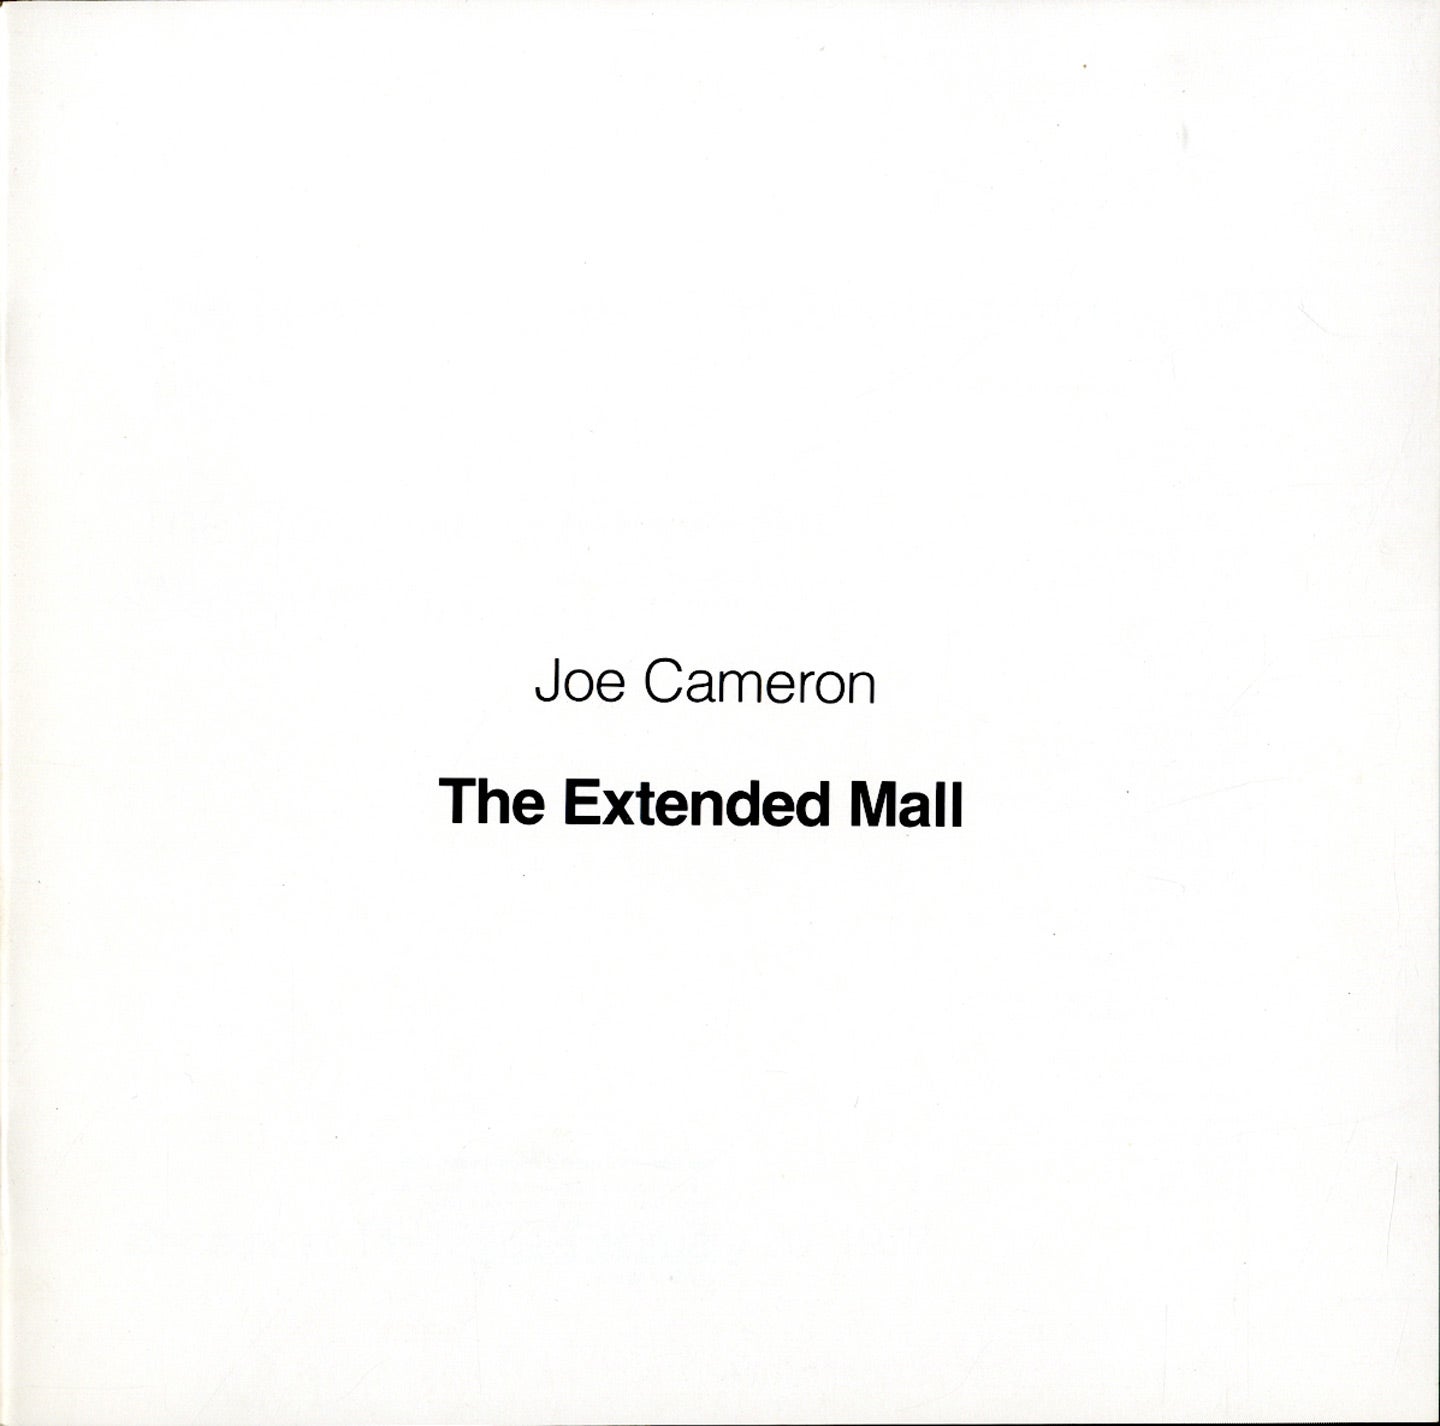 Photography at the Corcoran Series, The Nation's Capital in Photographs, 1976: Joe Cameron: The Extended Mall